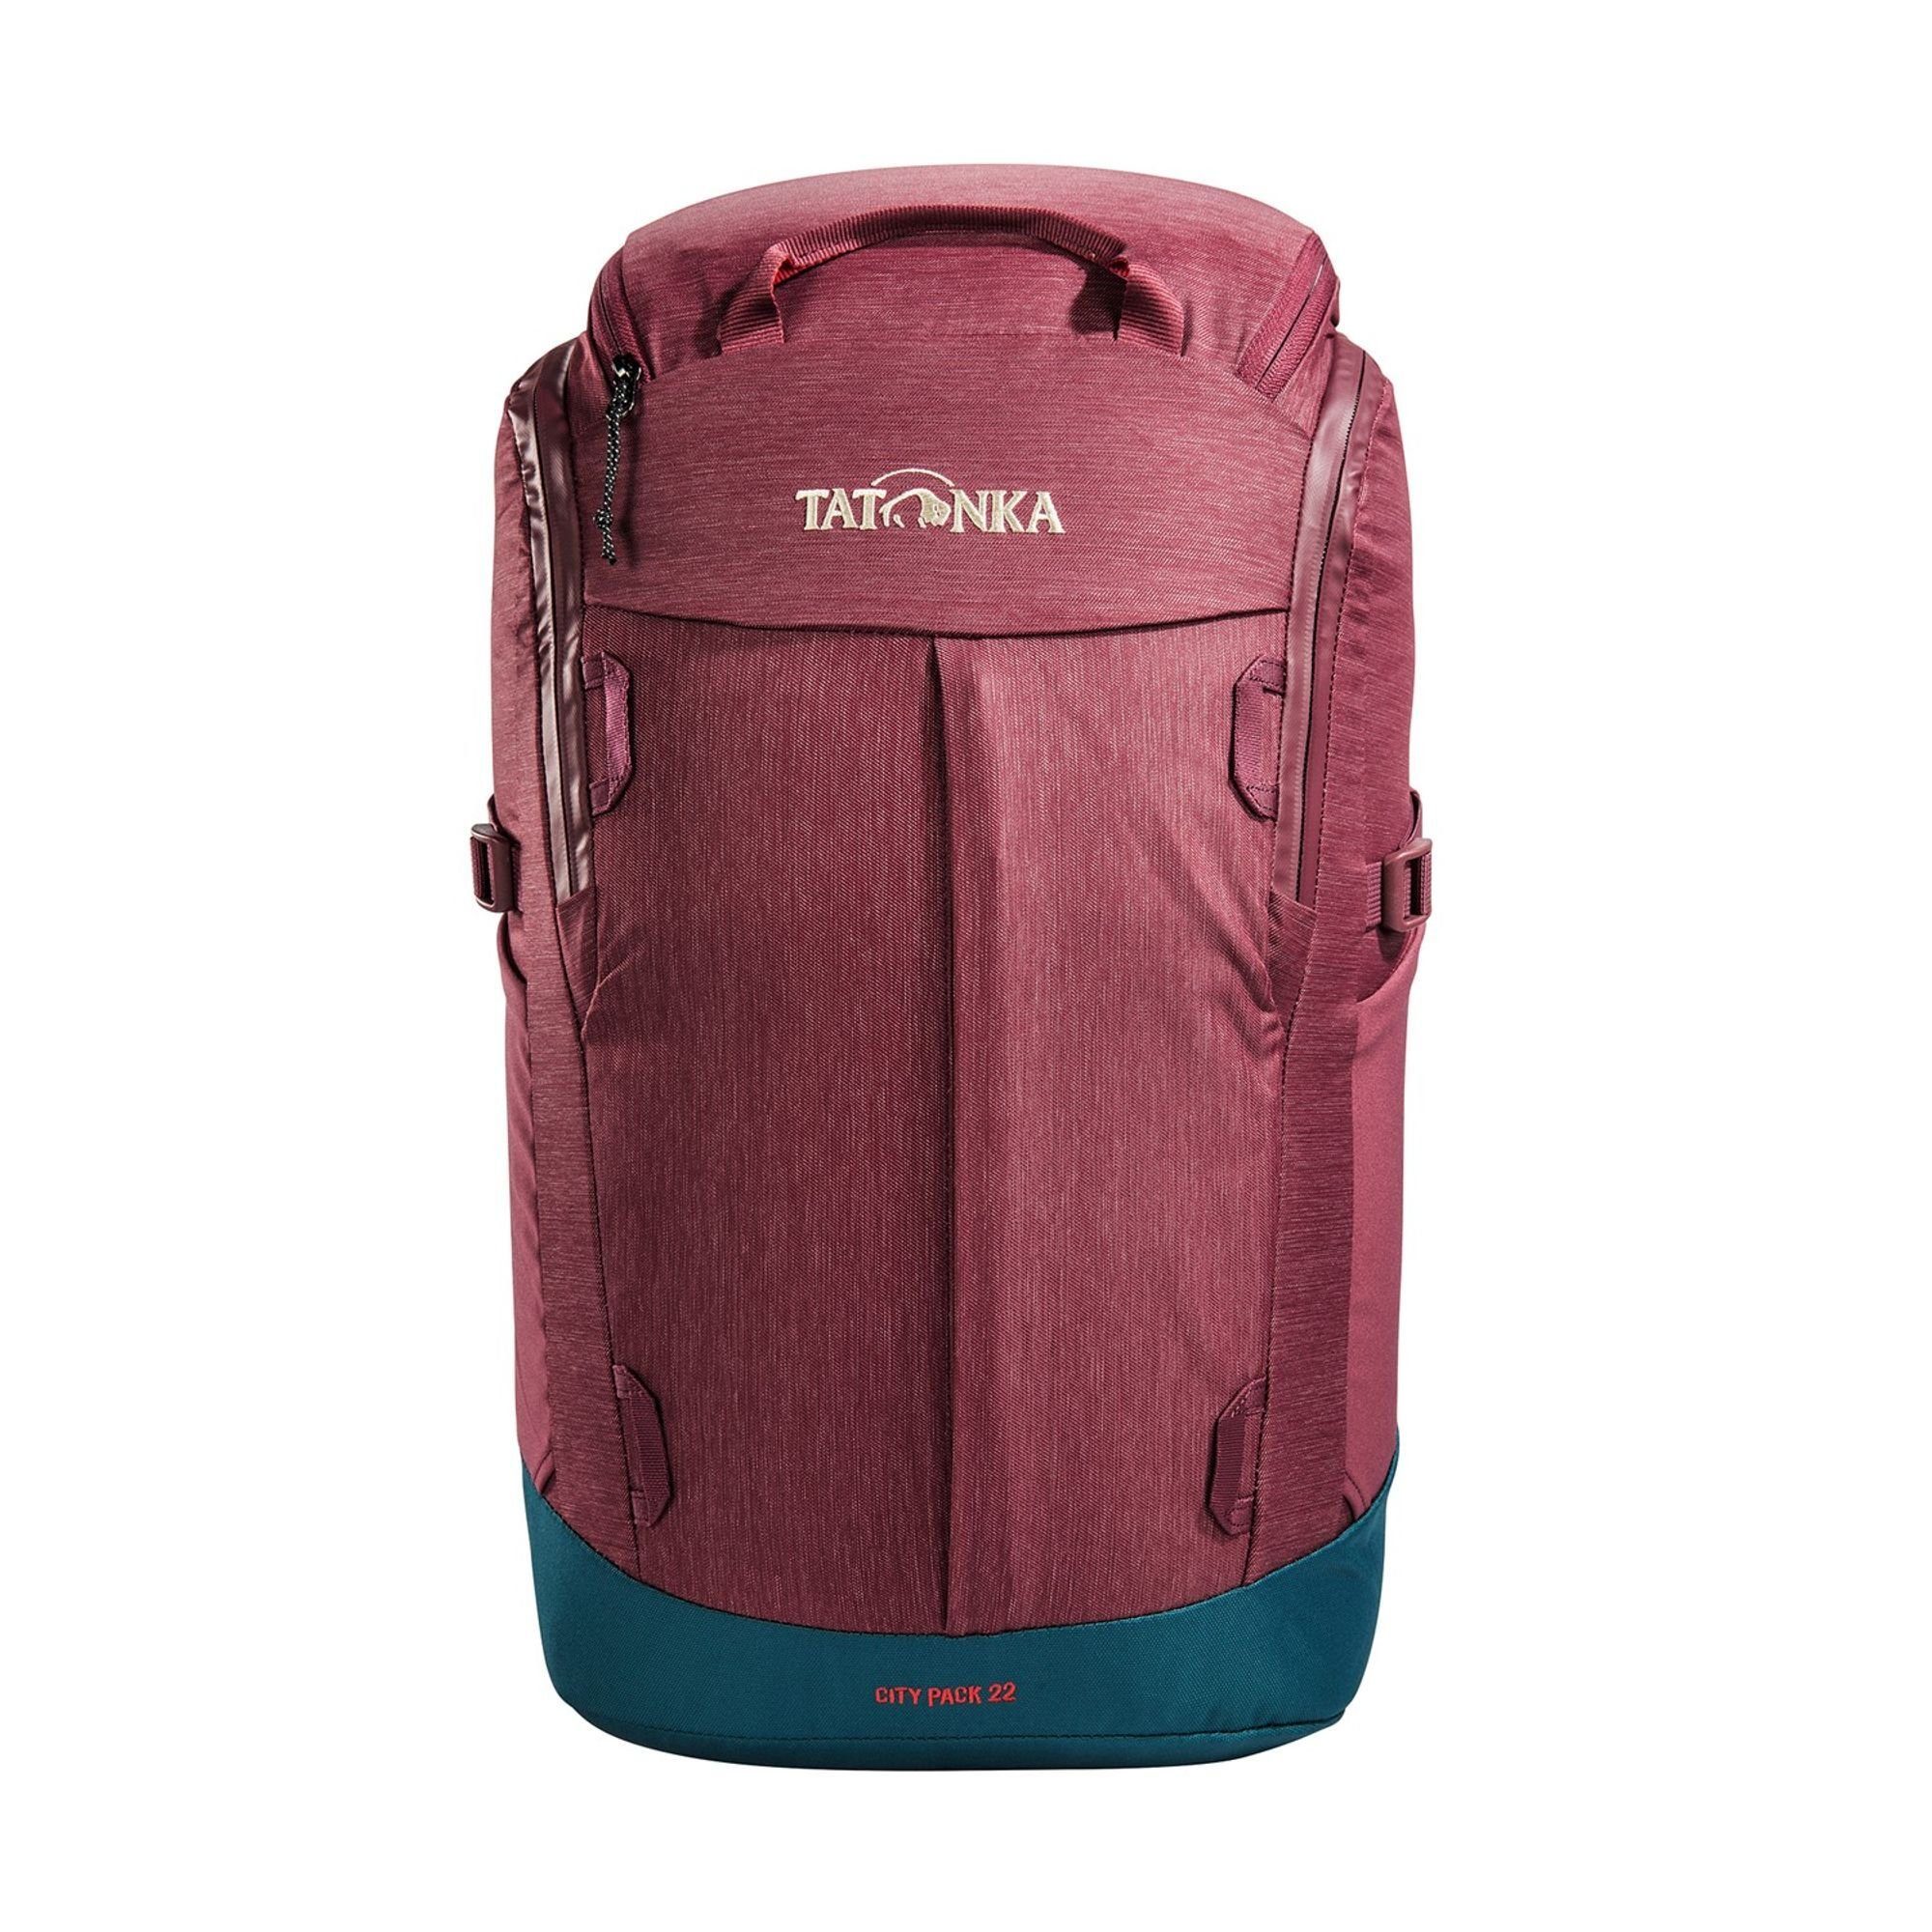 TATONKA® Daypack City Pack, bordeaux red Polyester